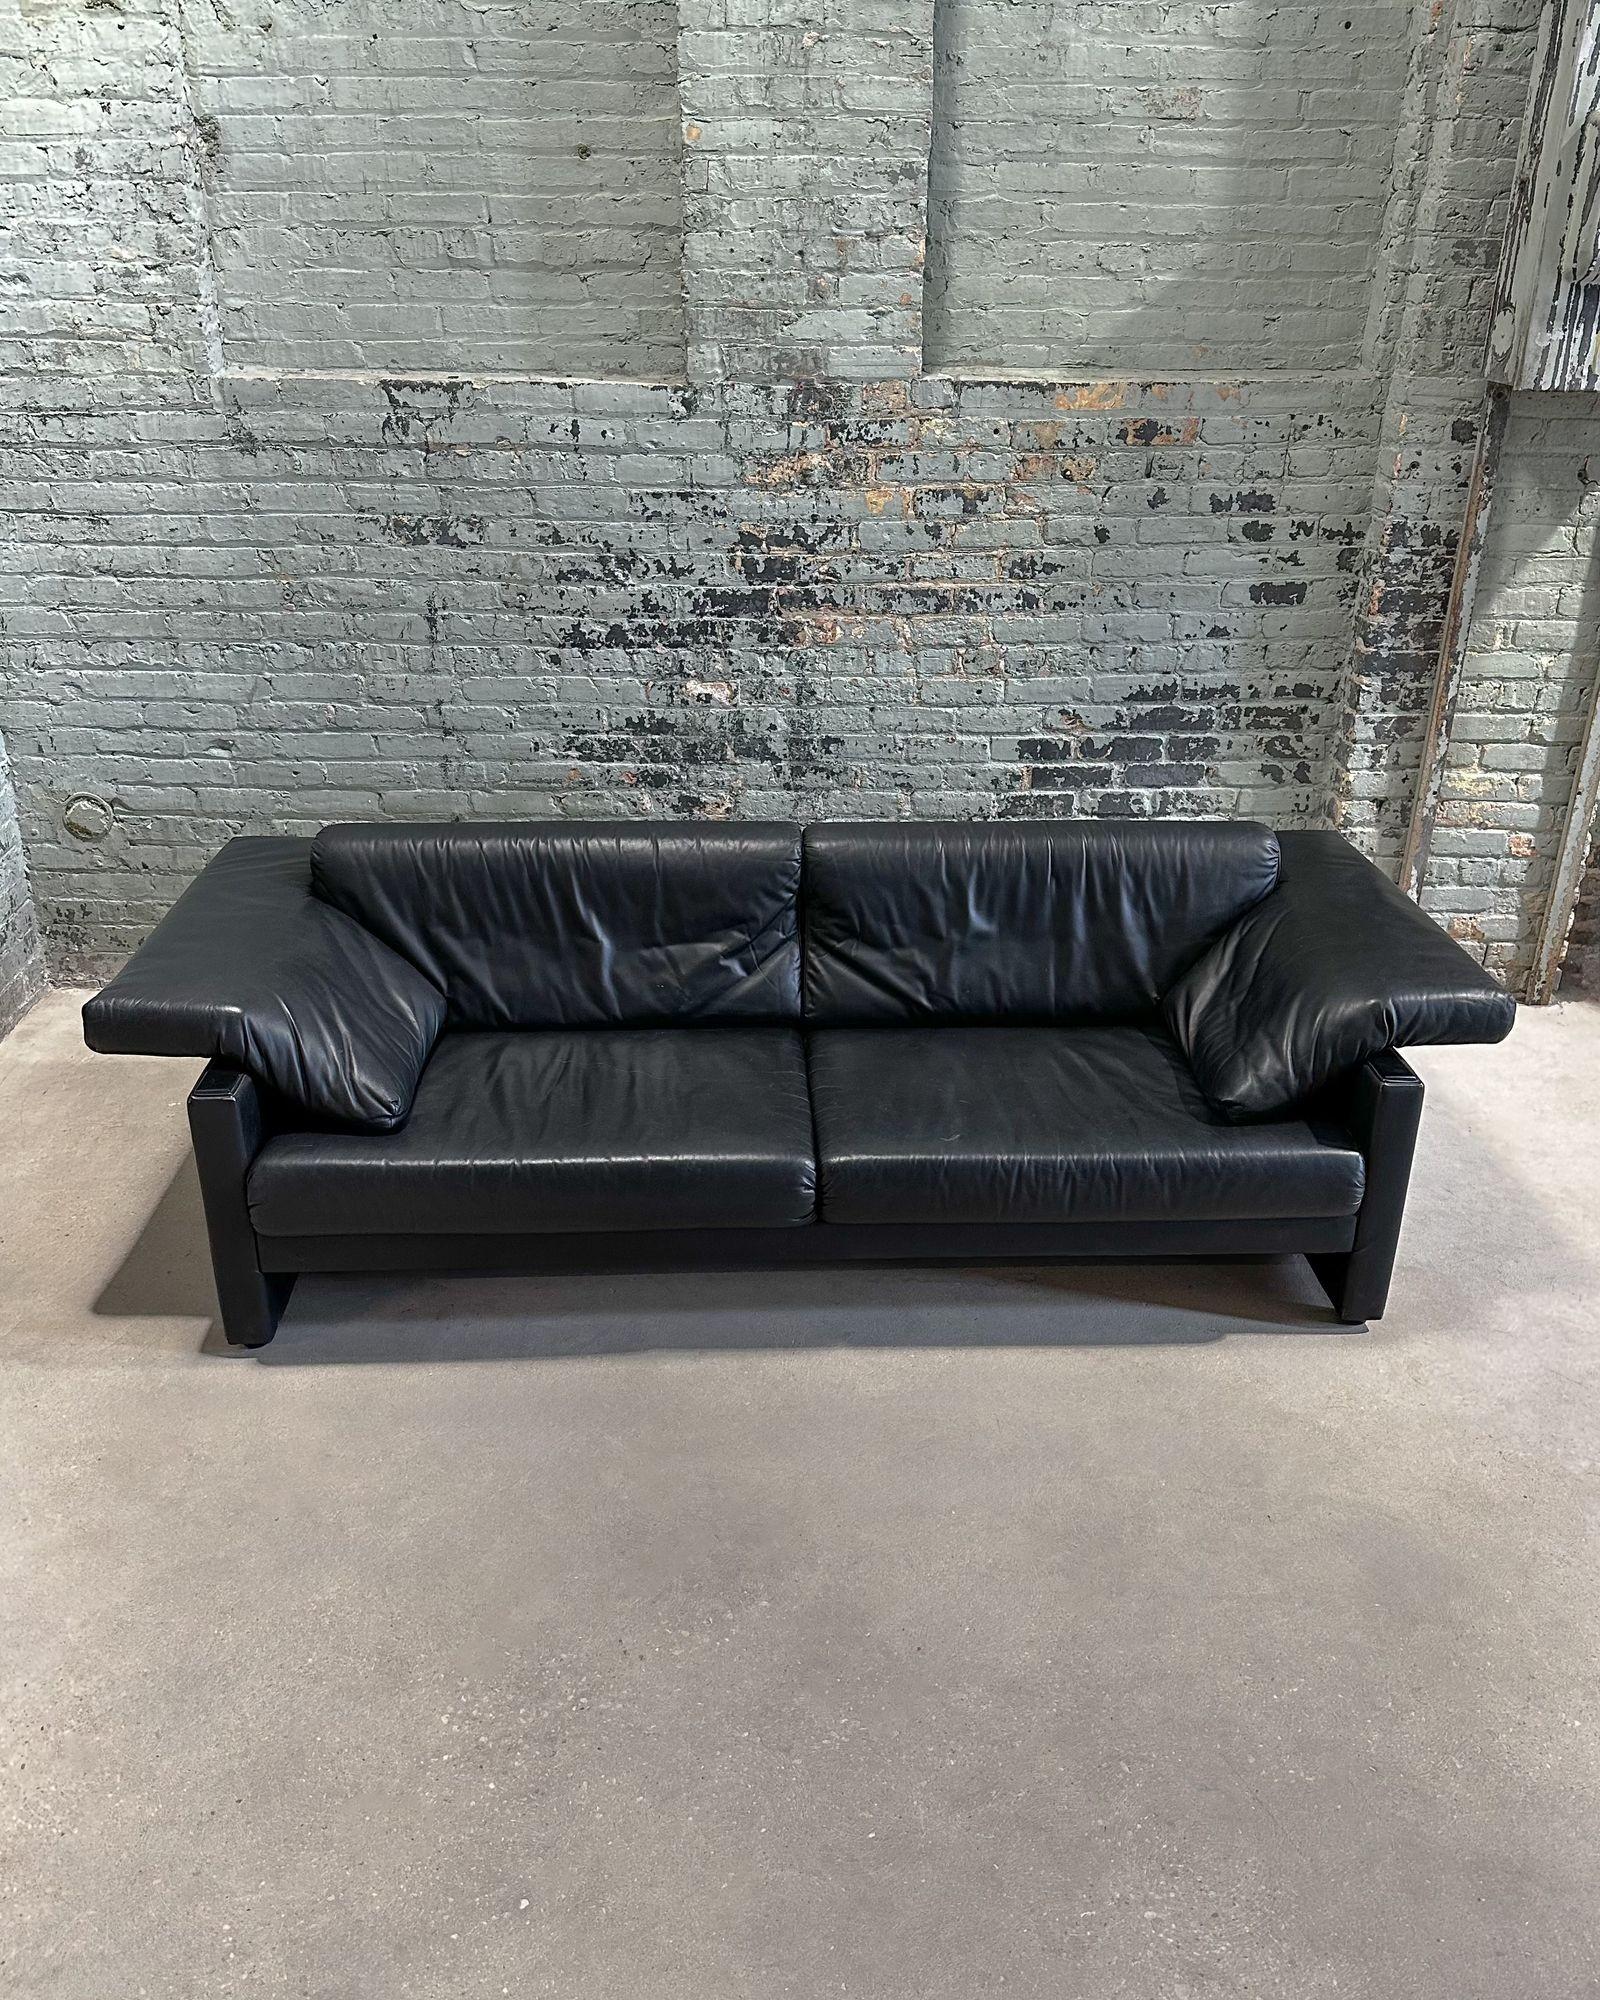 W. K. Wohnen Post Modern Black Leather Sofa, Germany 1980 In Good Condition For Sale In Chicago, IL